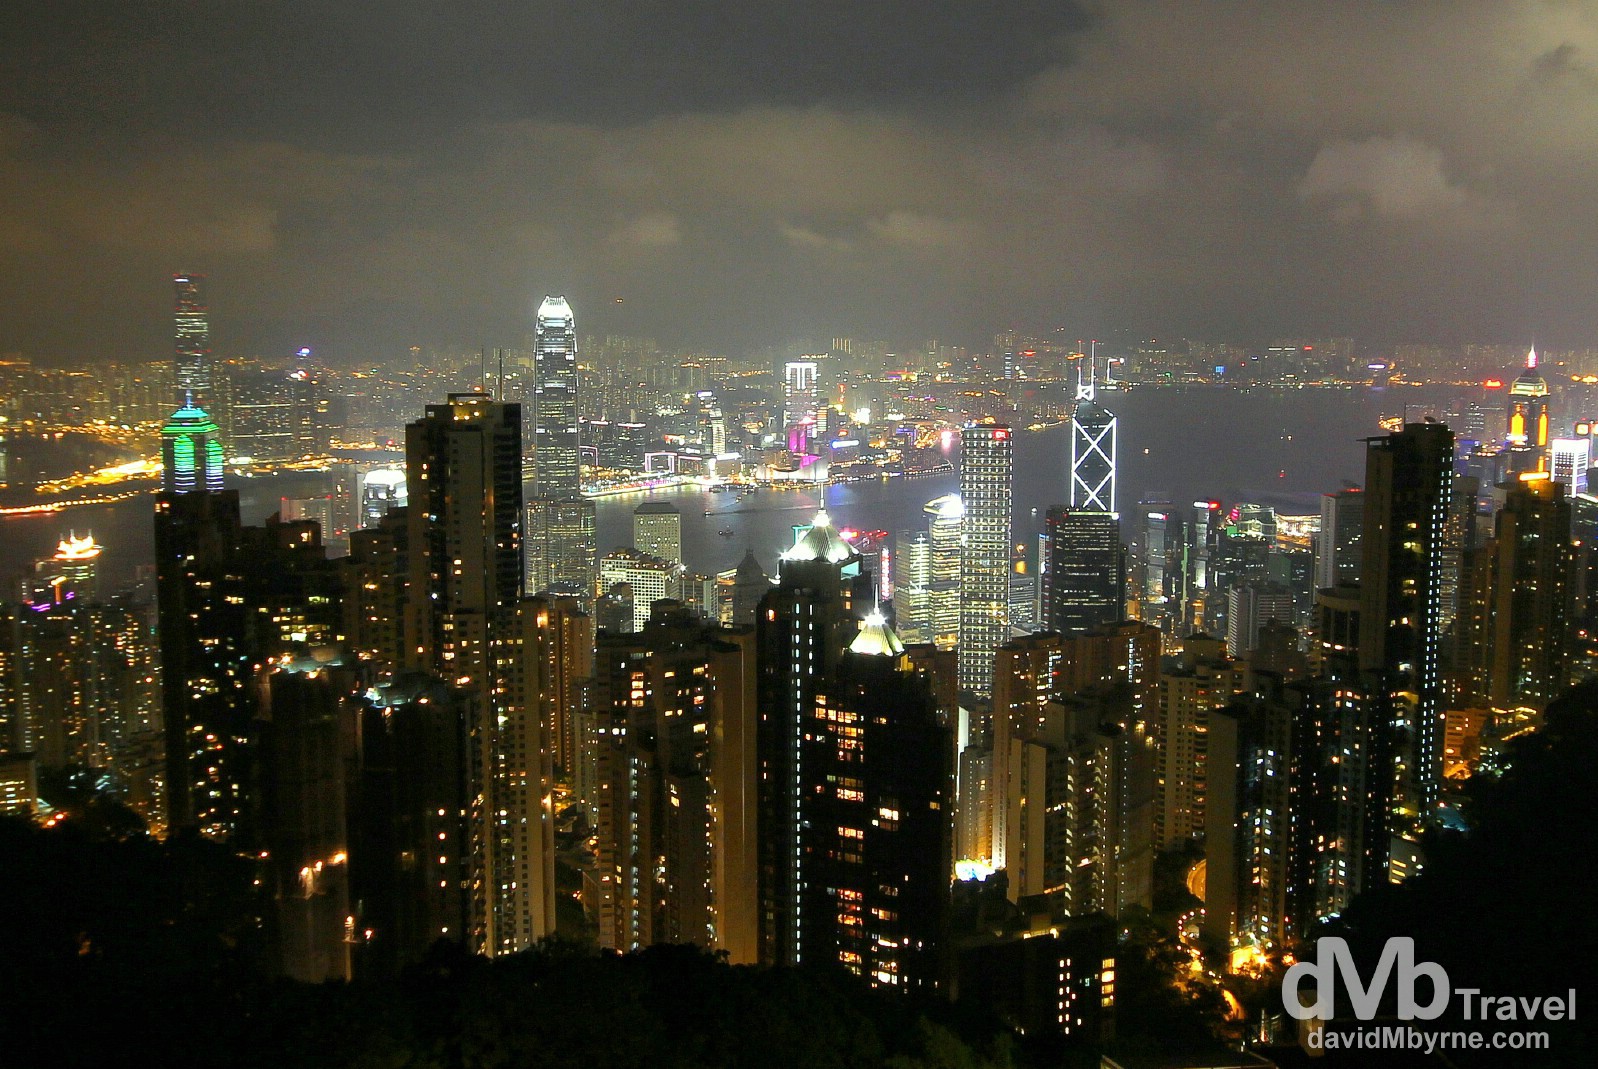 The Hong Kong Money Shot #2: The view of Central (foreground) & Kowloon (background) either side of Victoria Harbour as seen from Victoria Peak, Hong Kong Island. October 19th 2012.